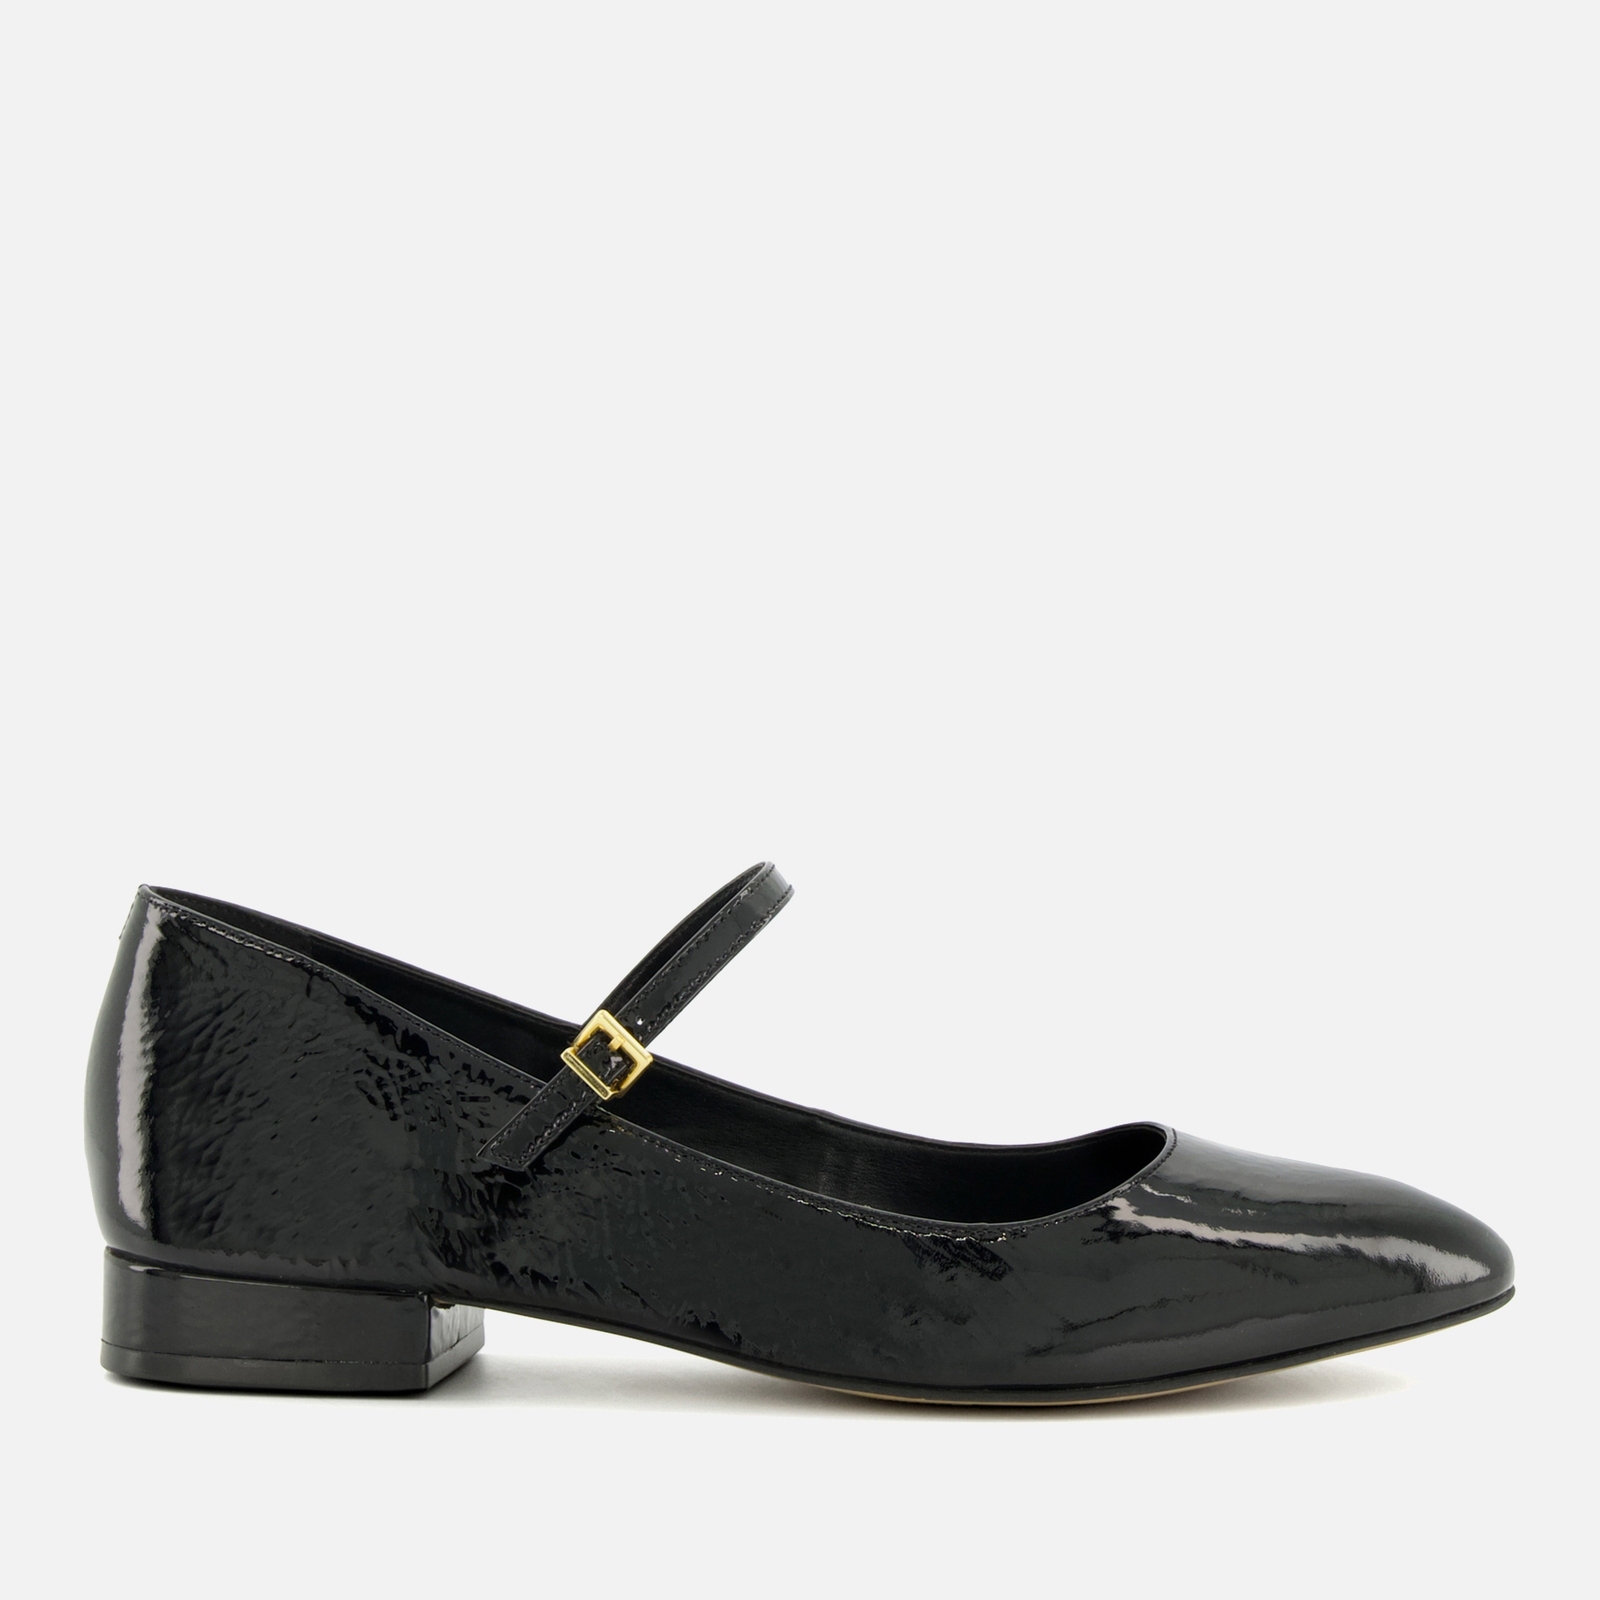 Dune Women’s Hipplie Patent-Leather Mary Jane Flats